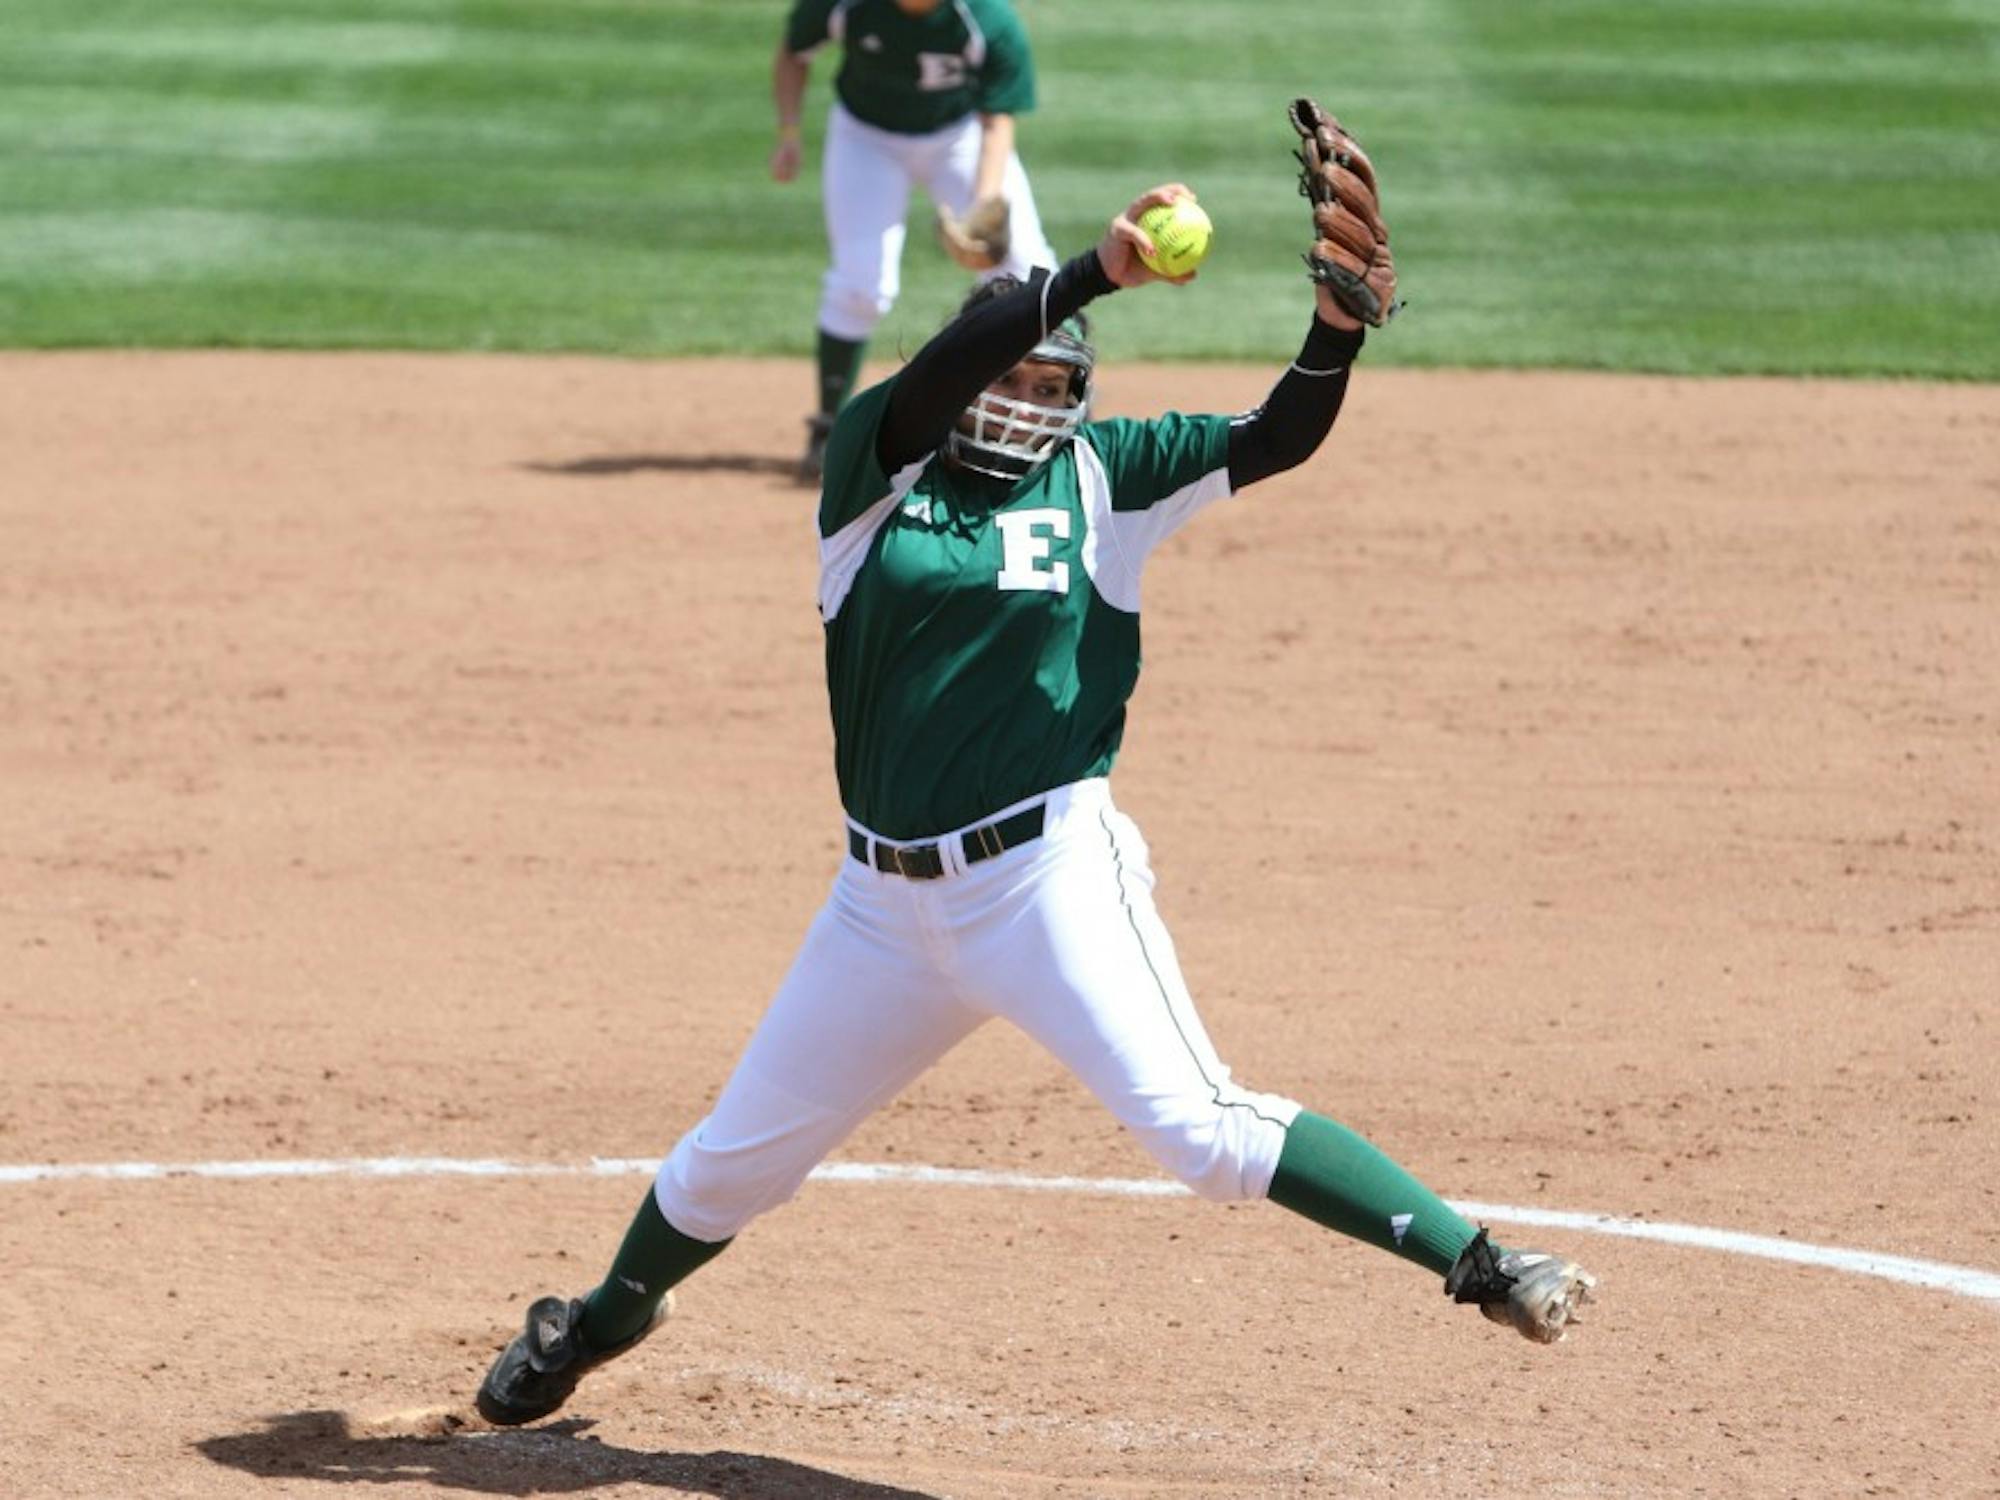 Jenna Ignowski, who earned many awards in high school, hopes to pitch a perfect game in her career with the Eagles. She has pitched three shutouts with EMU.